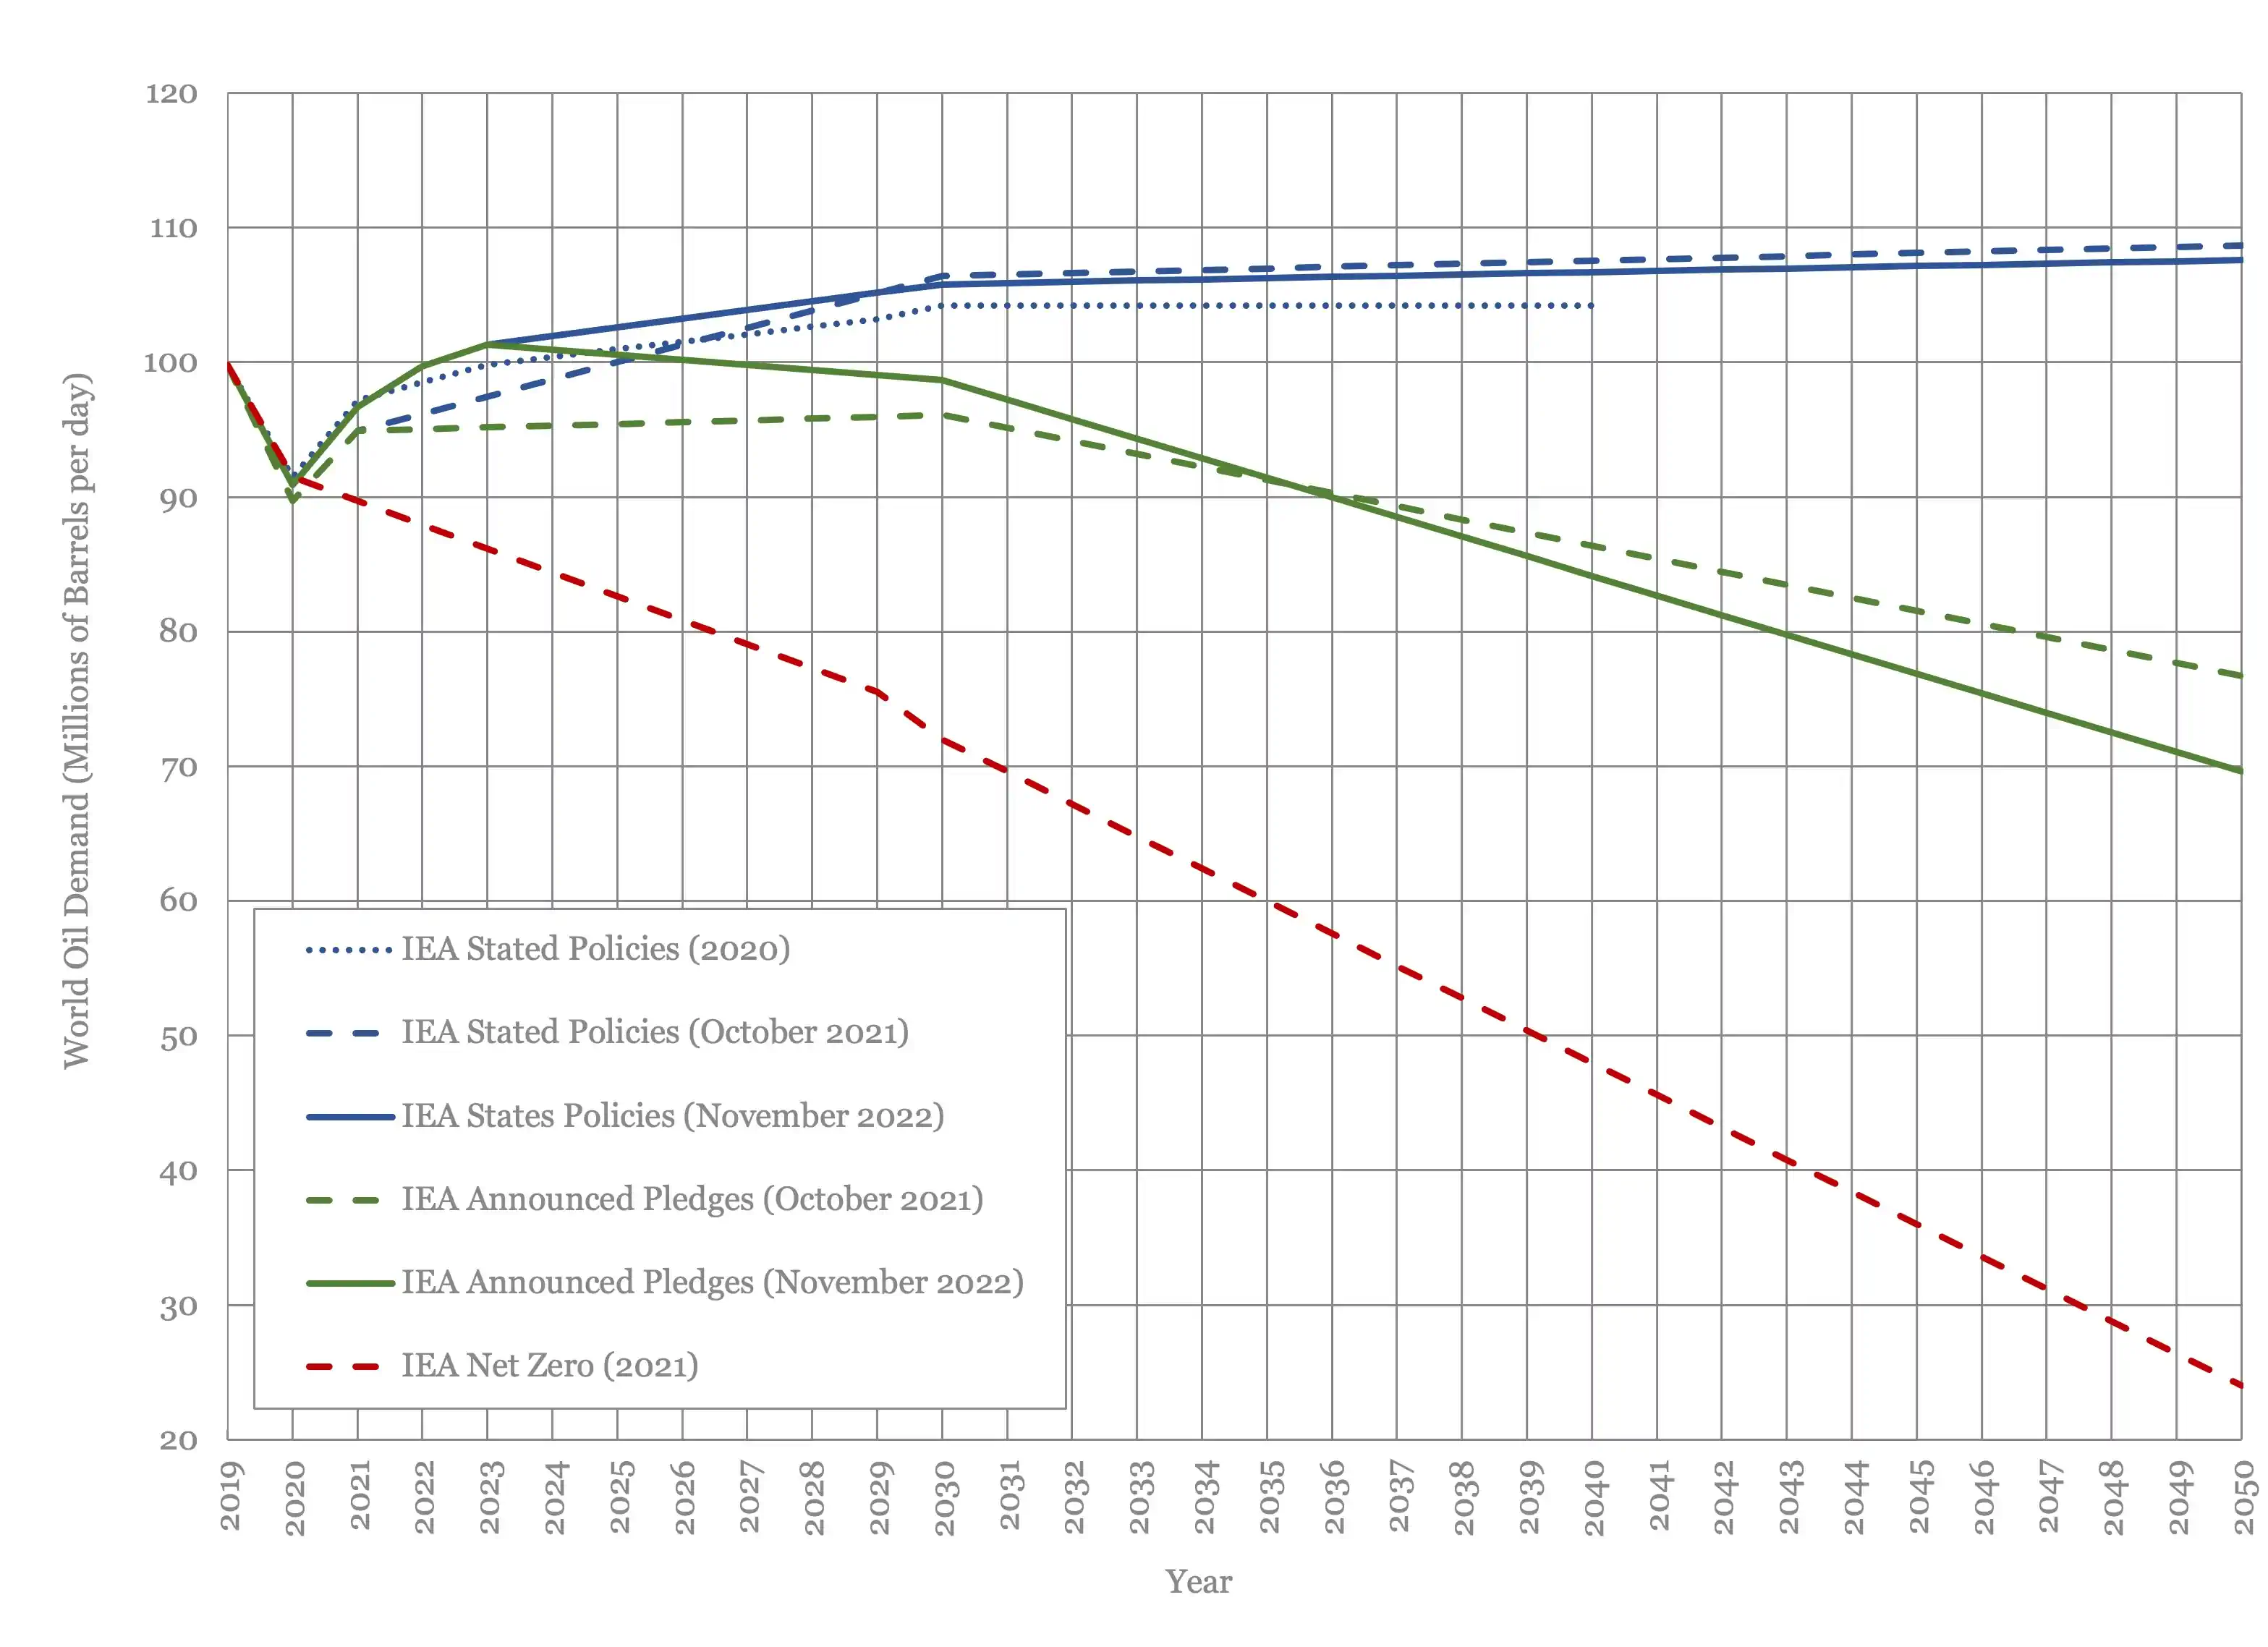 This chart shows the IEA's long term oil demand esimate for Stated Policies, Announced Pledges and Net Zero.